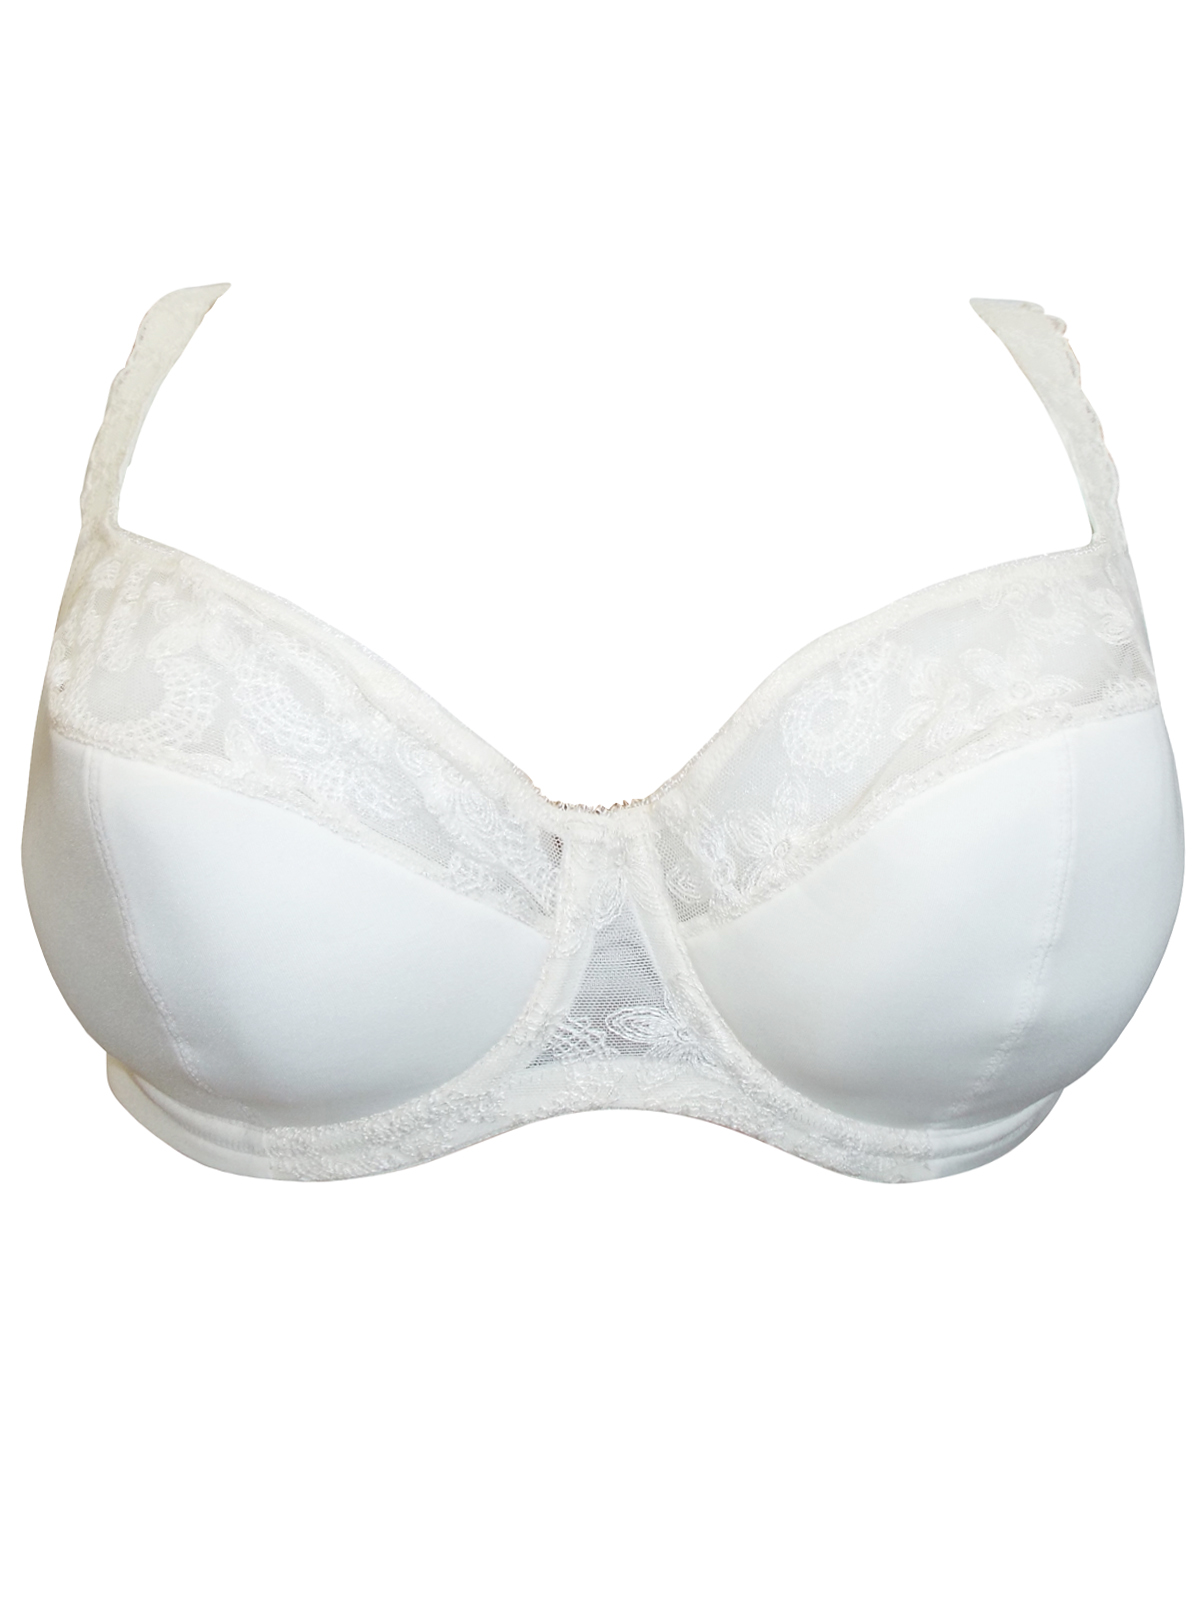 Penningtons - - Penningtons CREAM Floral Lace Underwired Full Cup Bra ...